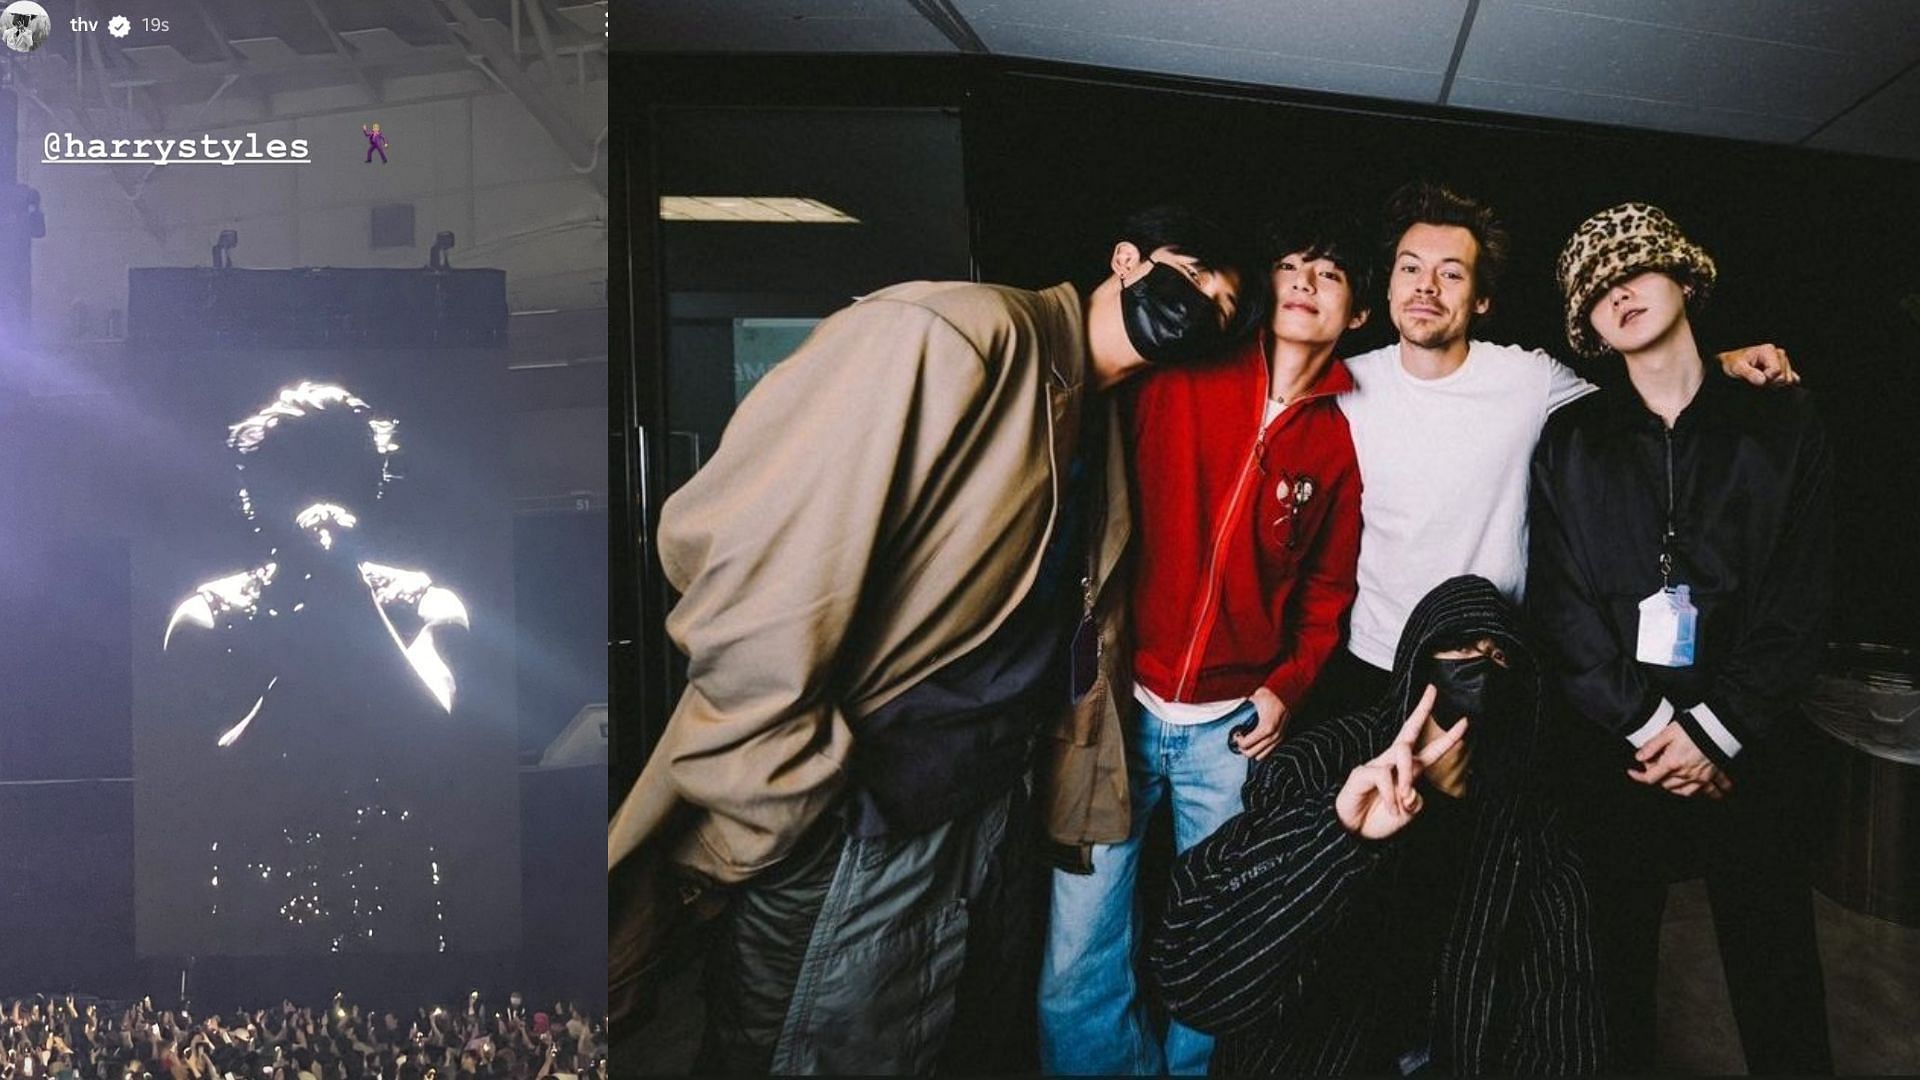 BTS&#039; V posted a snippet from Harry Styles&#039; concert (left), before posting a picture of all four members of the Dynamite group with the British popstar (right) on his Instagram stories. Leader RM also posted a similar picture on his story (not pictured). Fans were especially excited about the interaction because this is the second time that BTS members have been to a Harry Styles concert, having attended one in LA in December 2021. (Images via Instagram/ @thv)